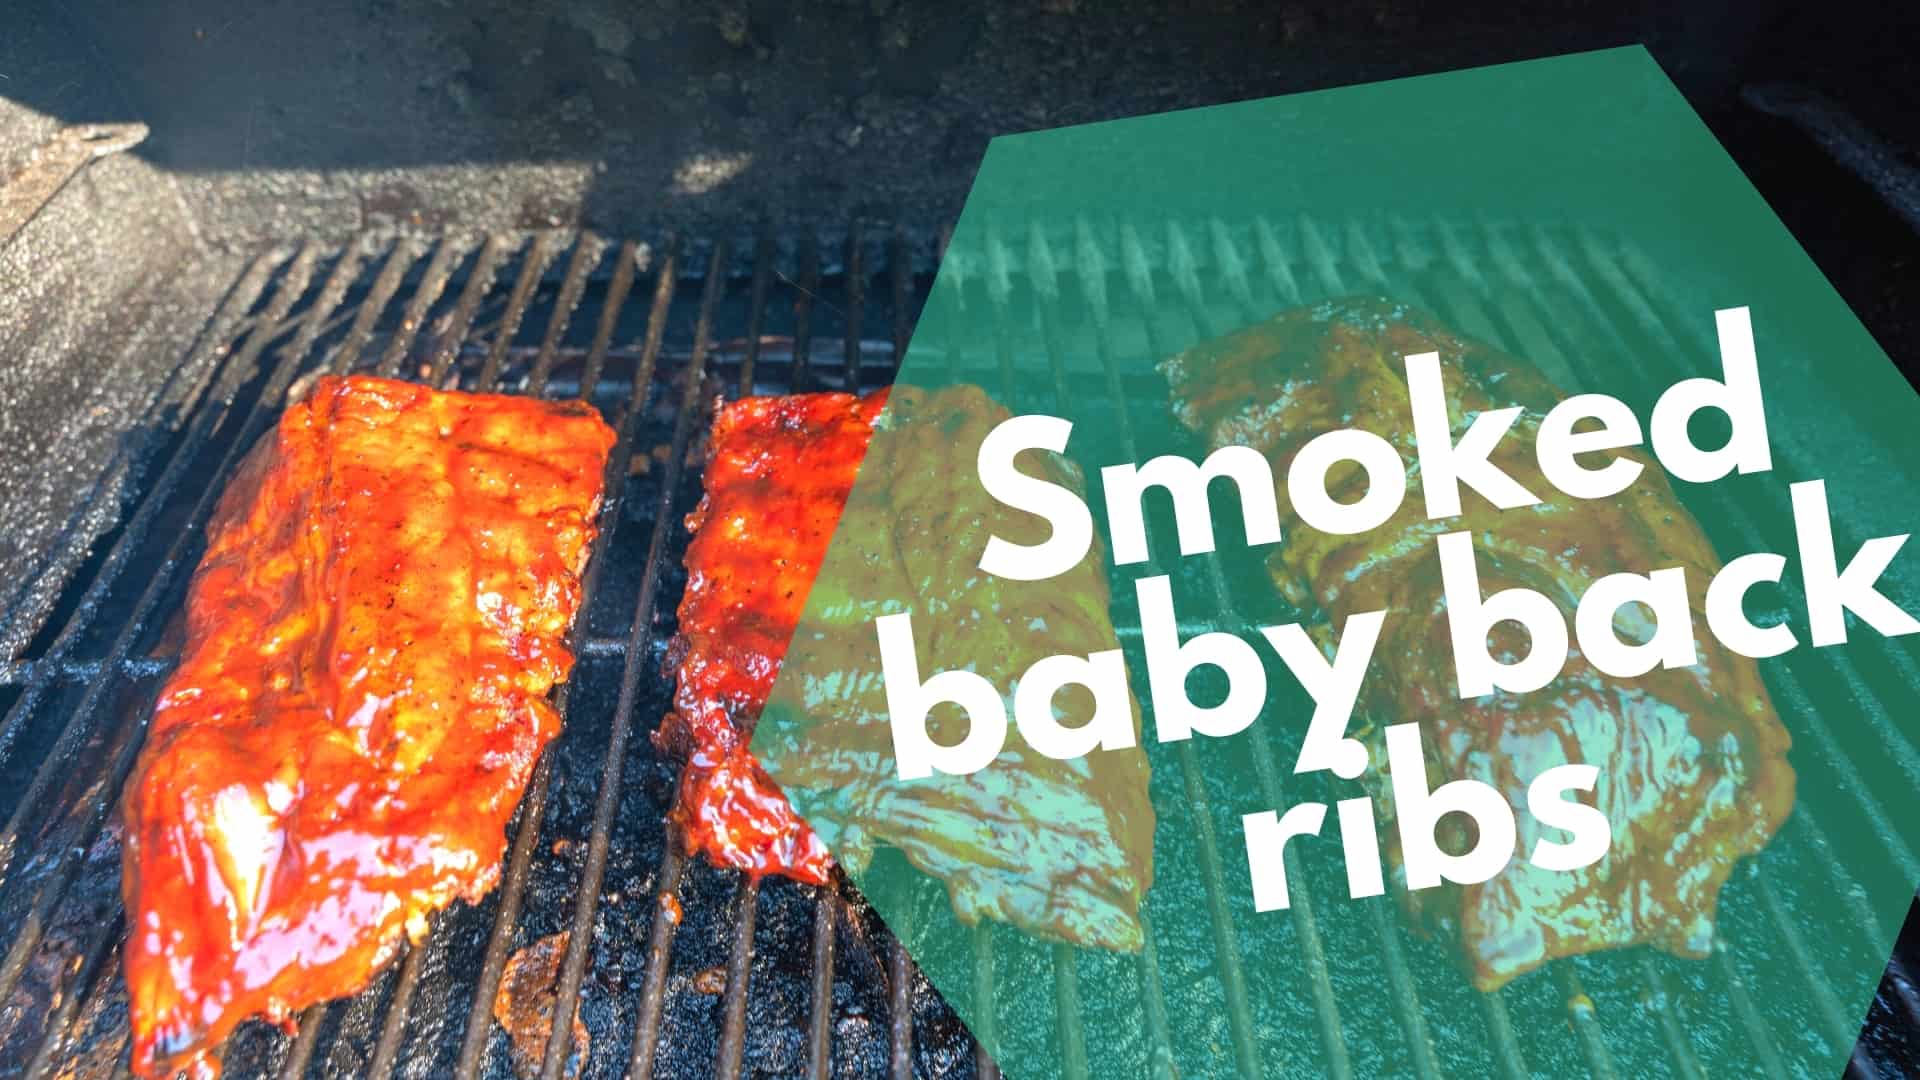 Pellet smoker baby back ribs: the unknown tip to delicious ribs